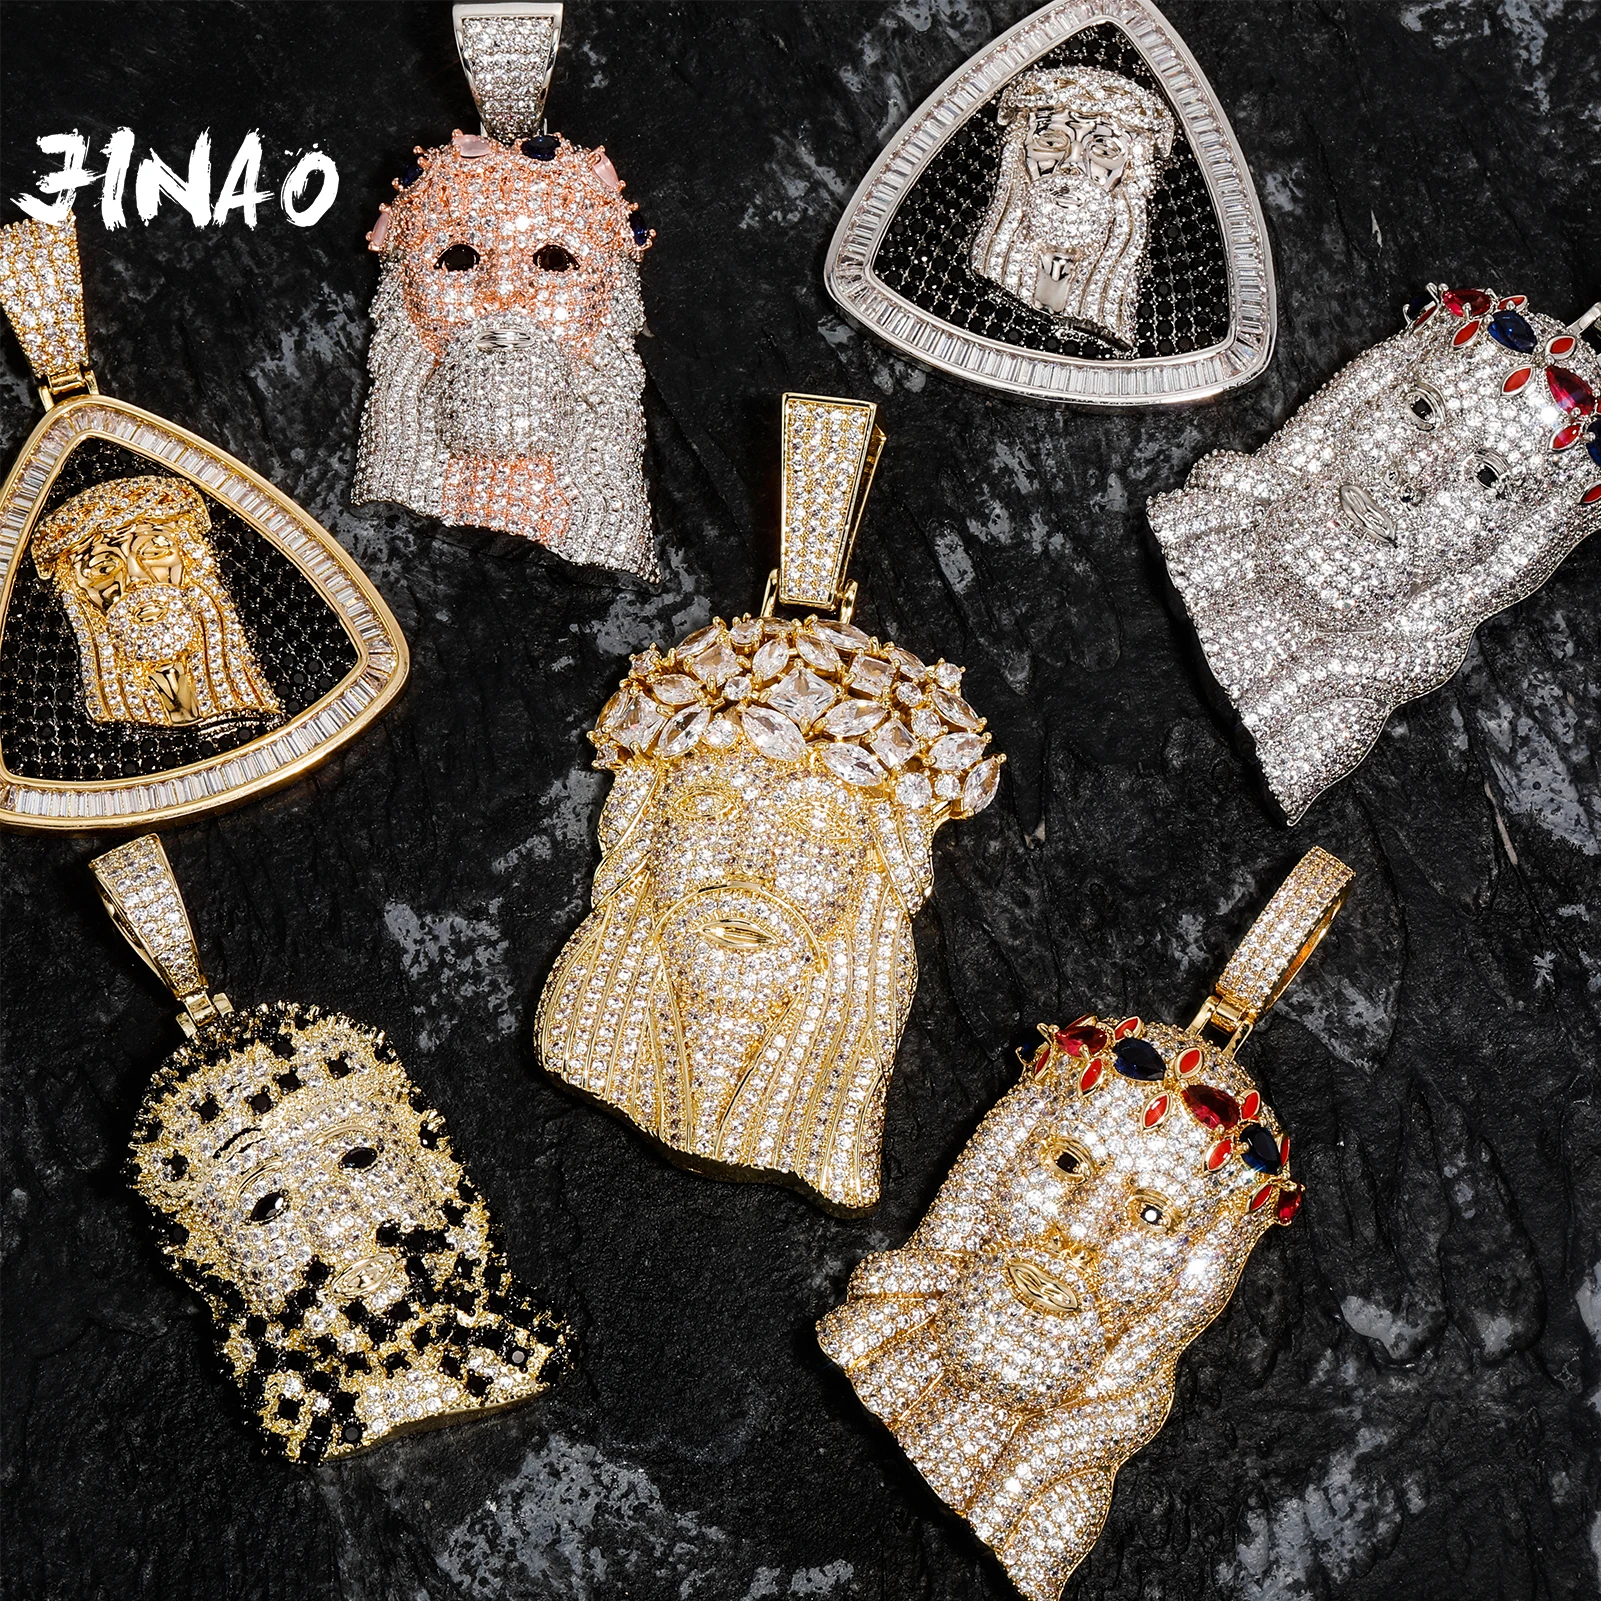 

JINAO High Quality Ice Cravejado AAA+ Cubic Zircon Jesus Head Series Pendant With 4mm Tennis Ball Chain Jewelry